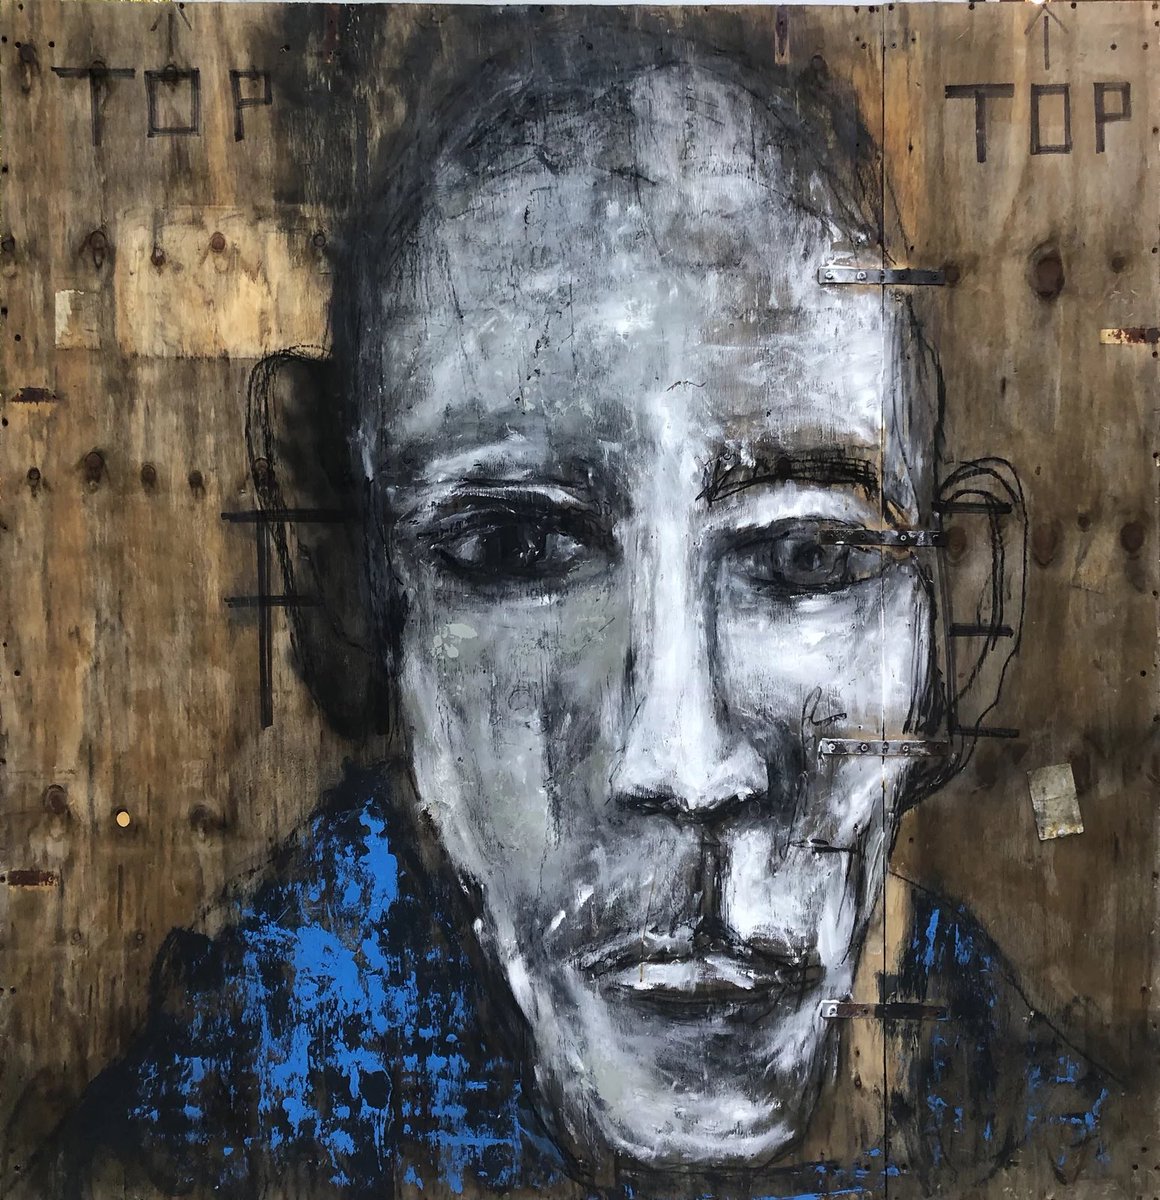 Dubious State Of Serenity, 2019 Charcoal, oil paint, acrylic on distressed plywood crate lid, screws, metal 66 × 63 x 21/2 in | 167.6 × 160 x 6.4 cm US$14,000. - #art #contemporaryart #officedecor #luxuryhome #angelagebhardt #artbaselmiami #loft #artcollection